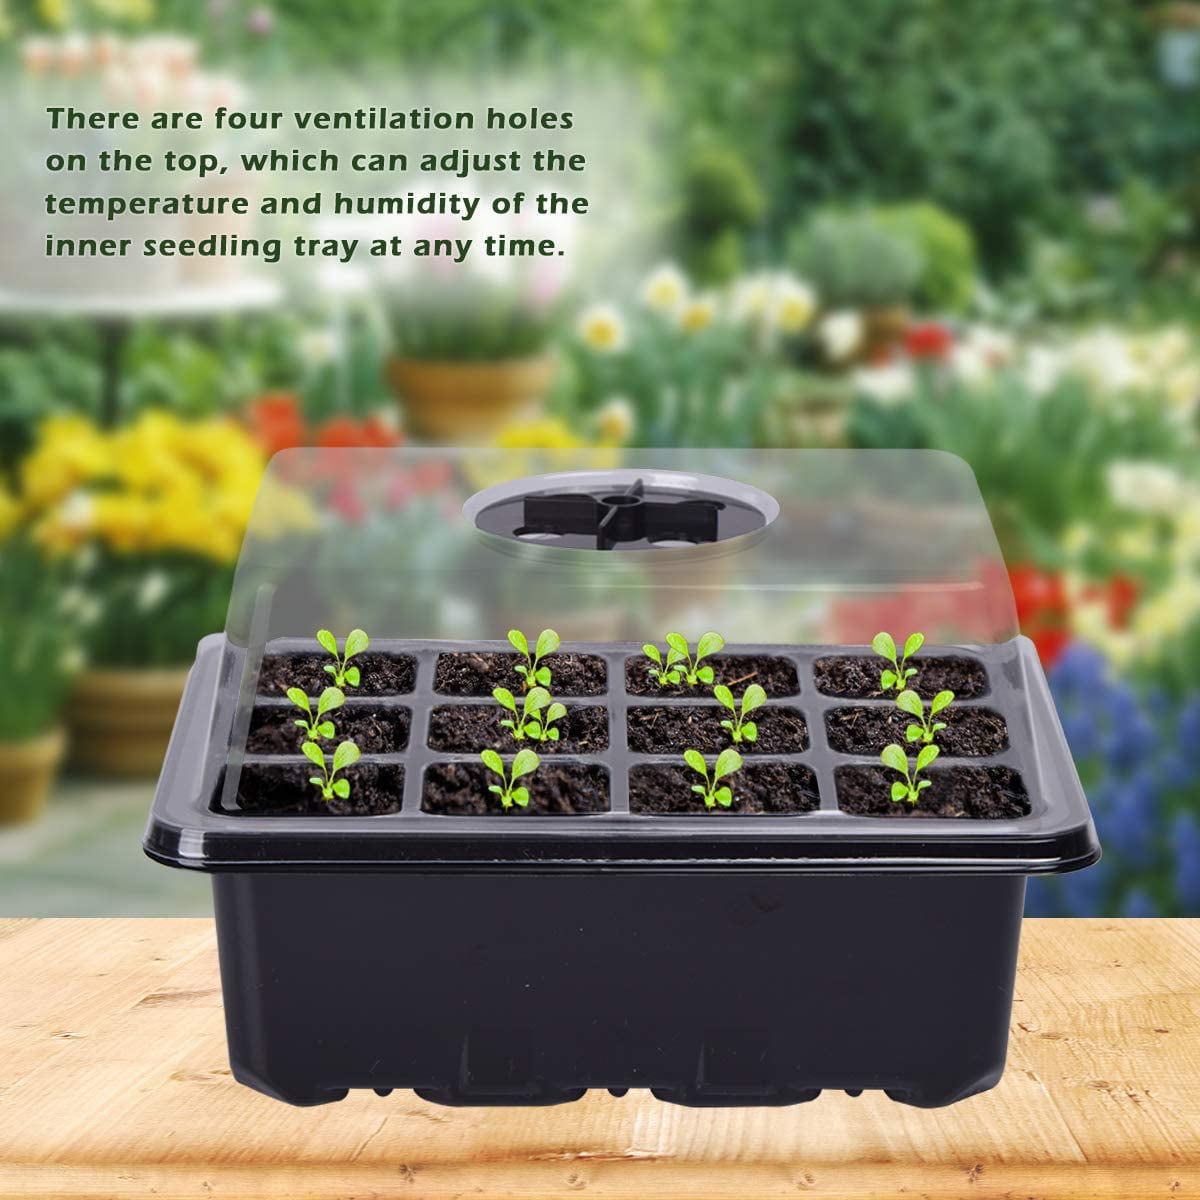 12-Pack Seed Starter Trays, 144-Cell Seed Starter Kit with Humidity Dome, Flat Reusable Plant Germination Trays with Drain Hole, Green Propagation Tra